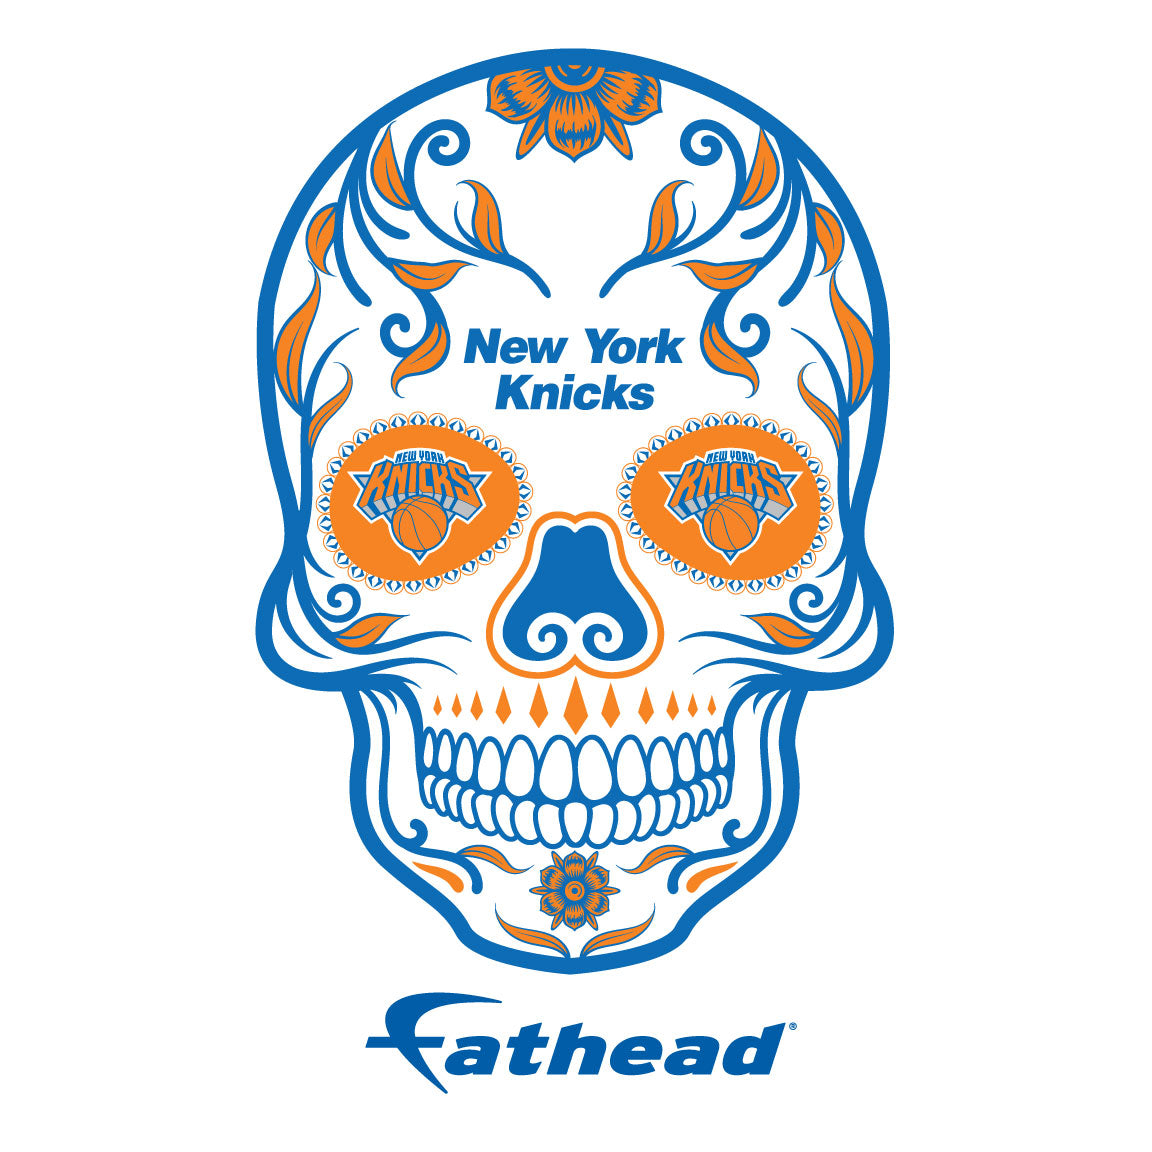 Sheet of 5 -New York Knicks: Skull Minis - Officially Licensed NBA Removable Adhesive Decal